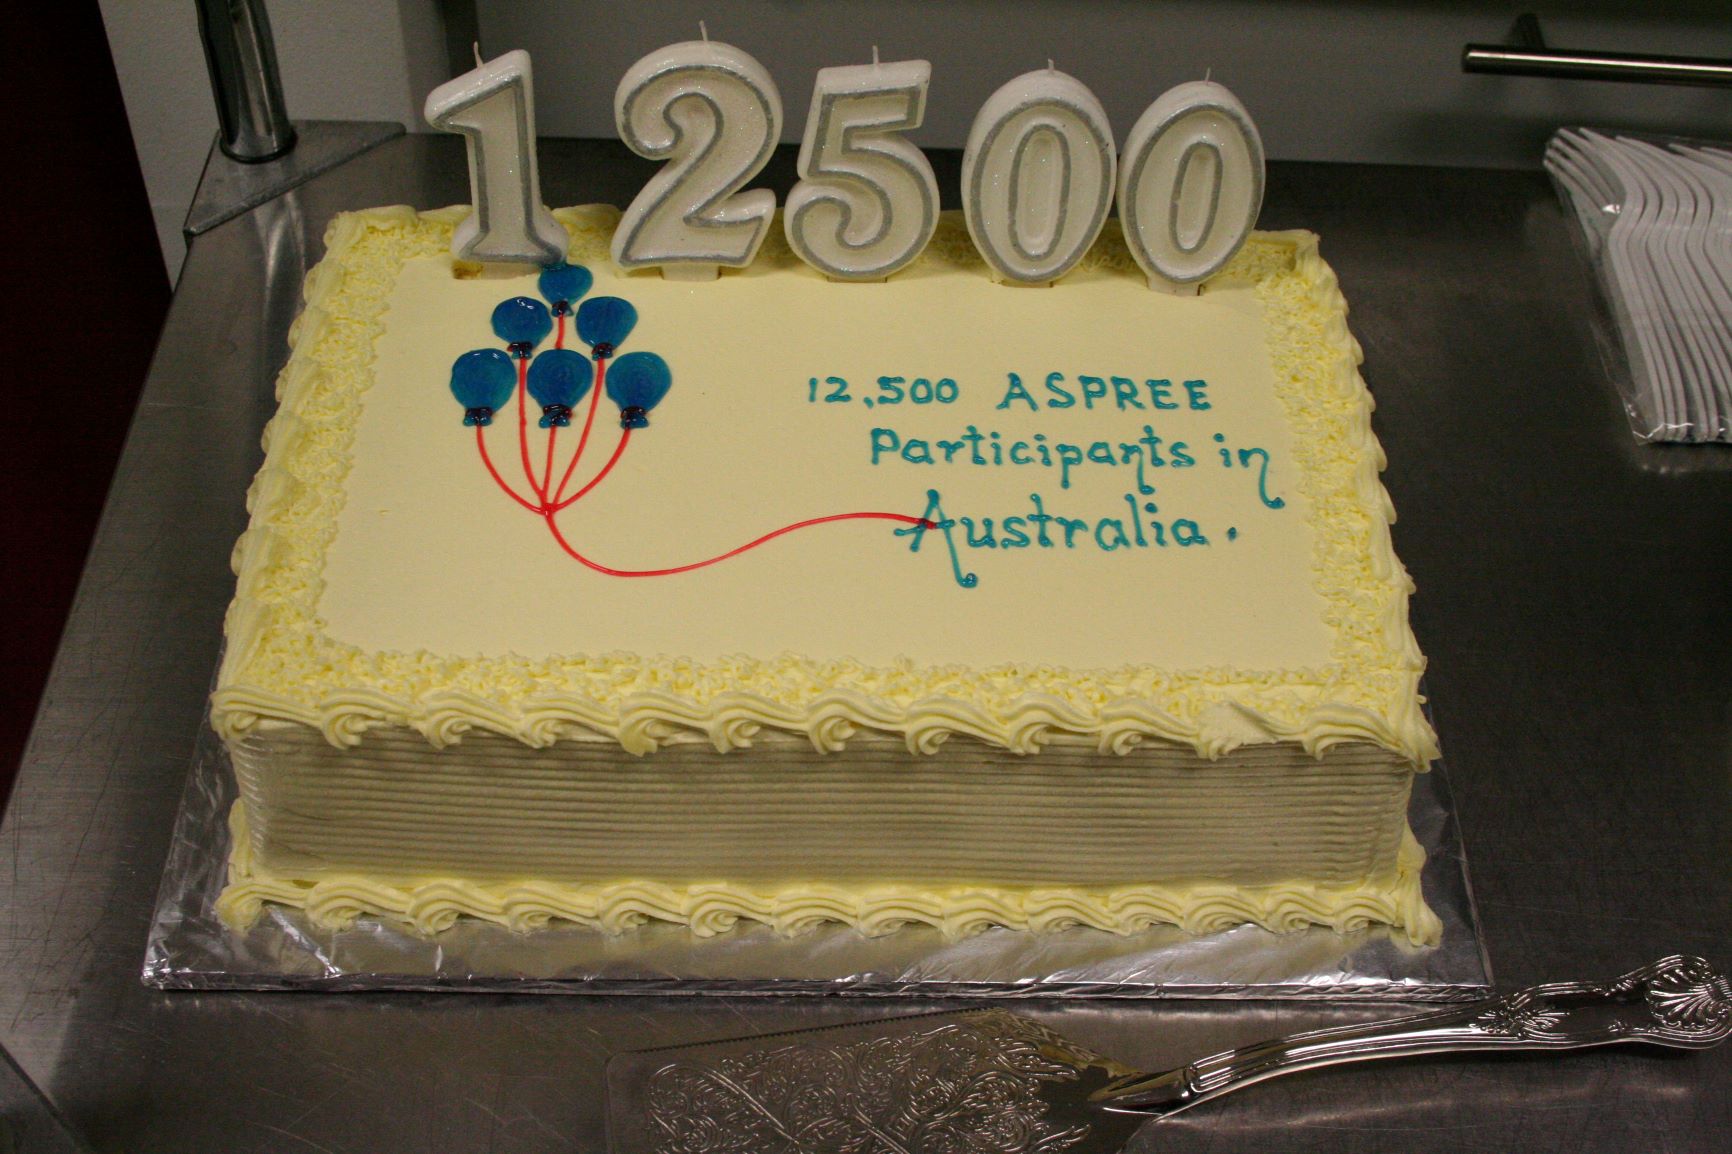 Yellow cake with 12,500 ASPREE participants in Australia written in blue icing